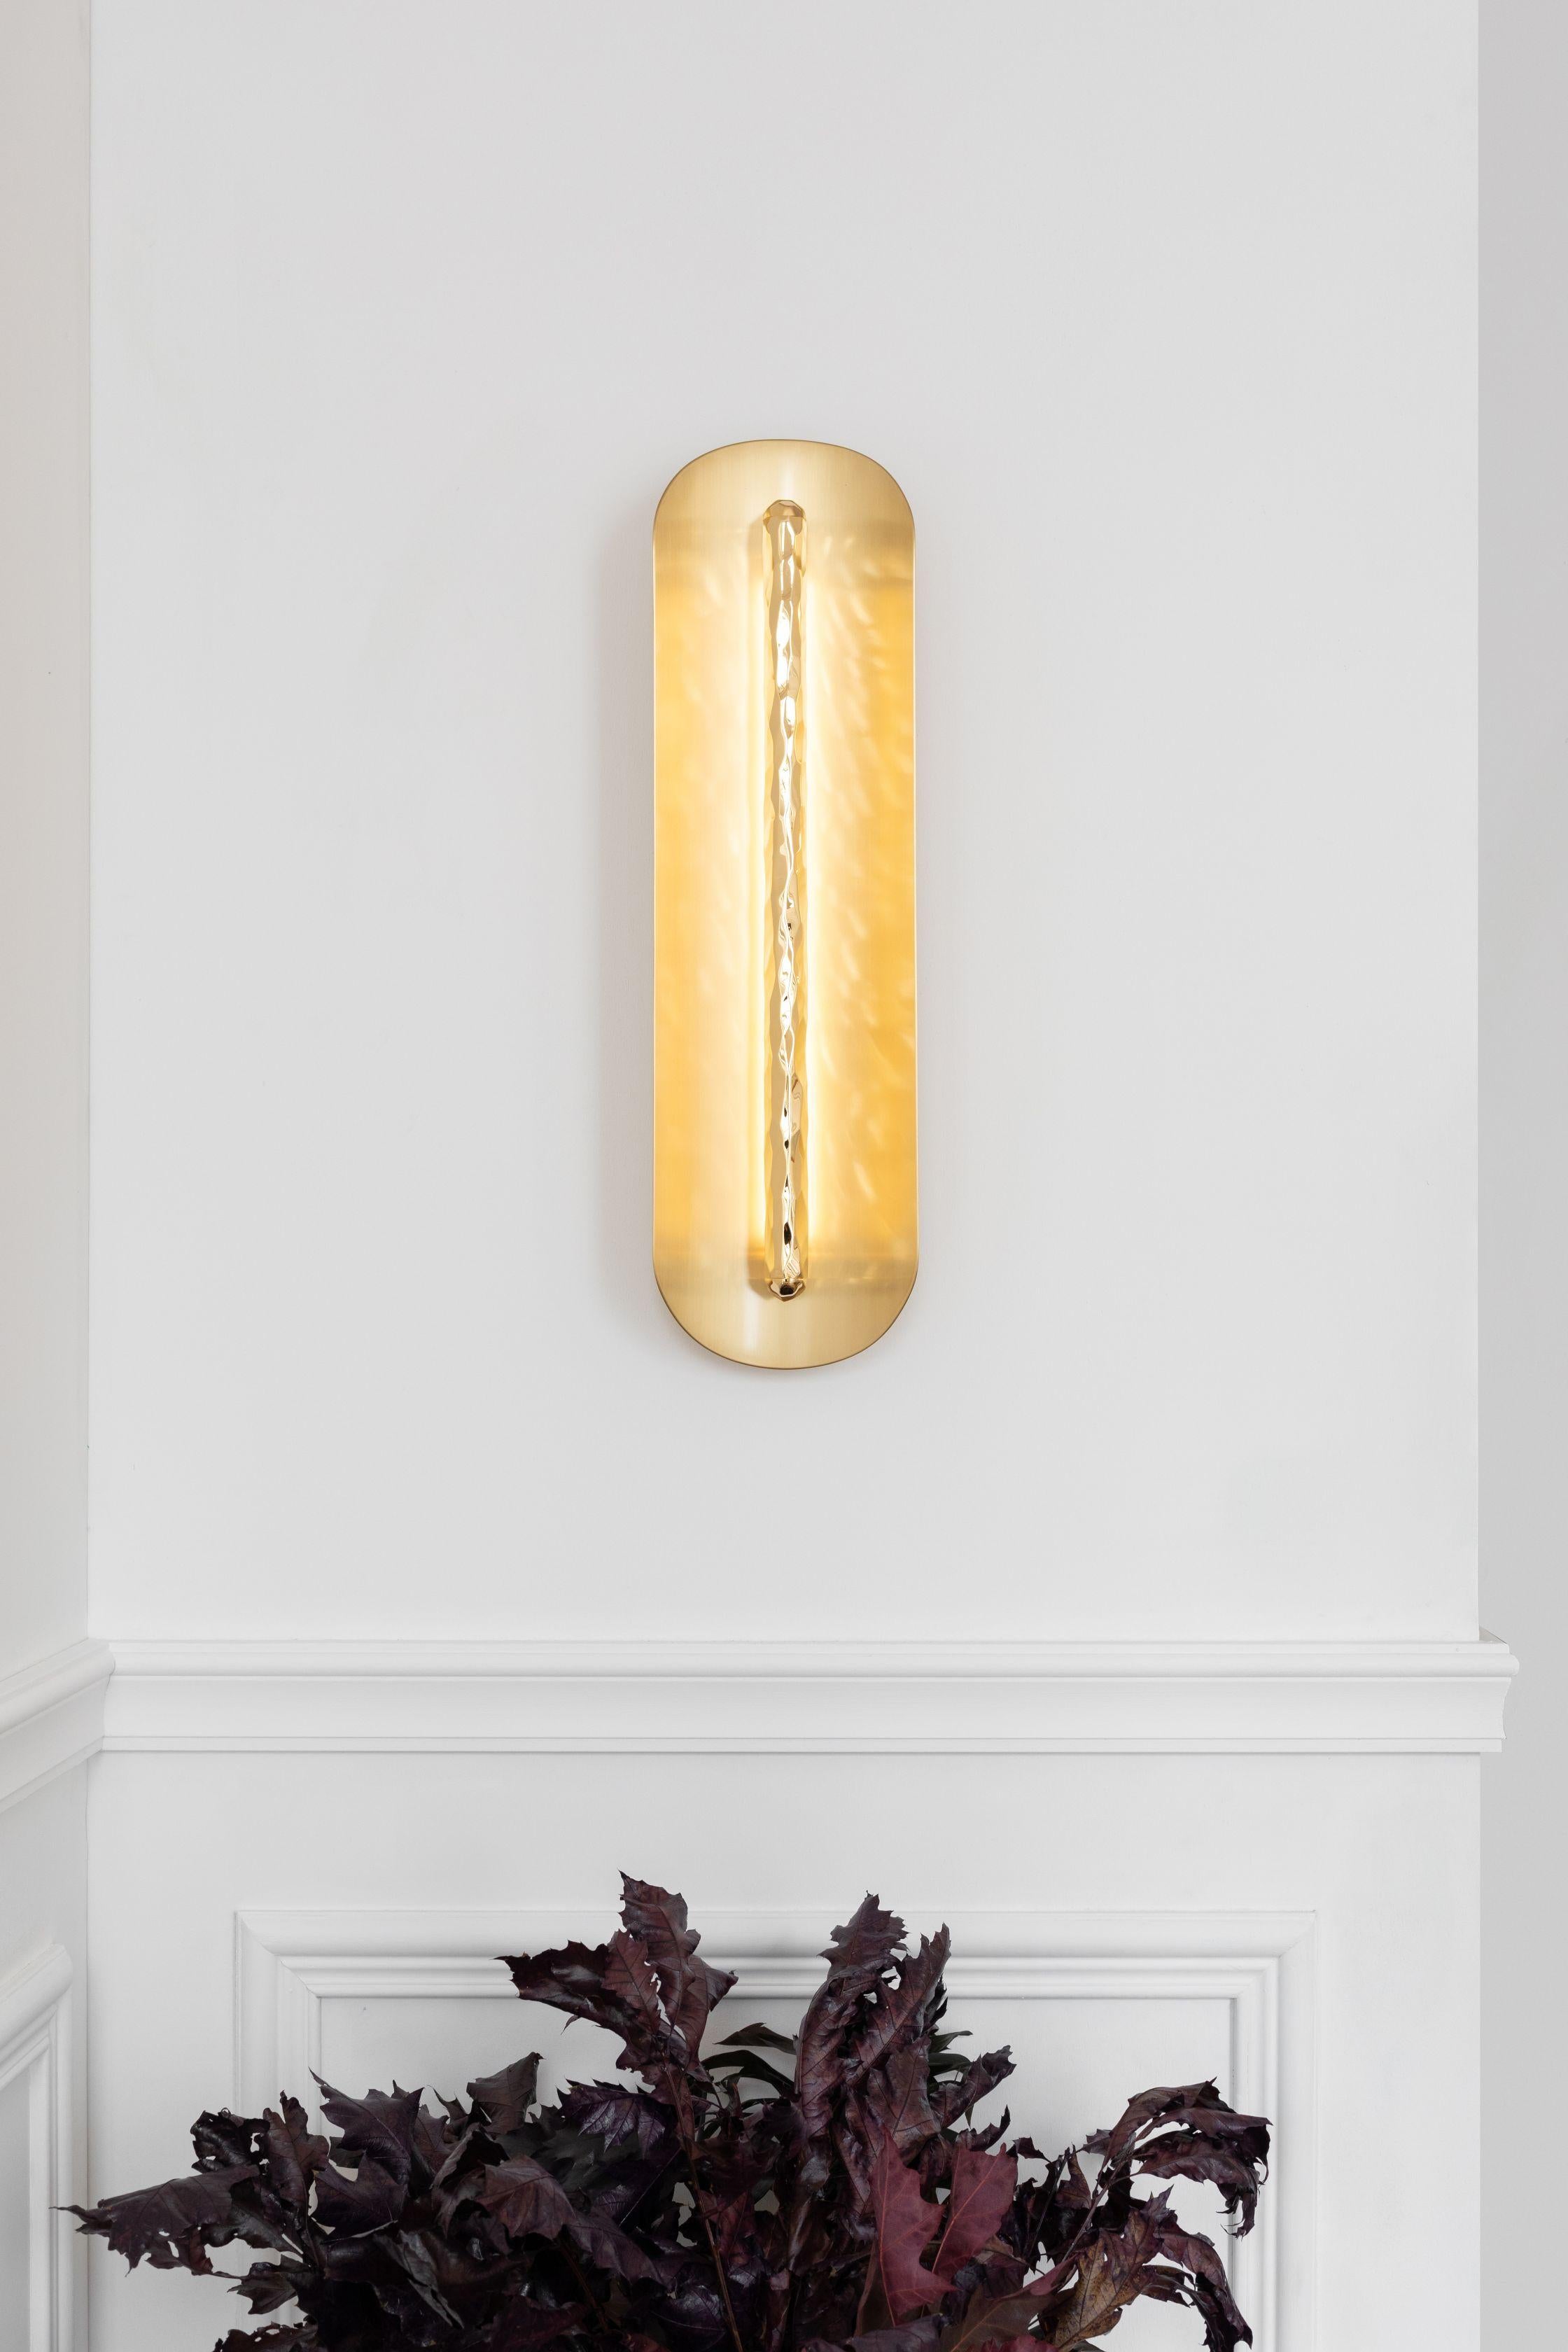 Silex wall lamp by Mydriaz
Dimensions: W 14.5 x H 60 x D 14 cm
Materials: Brass
Finishes: Golden-plated, polished brass, white nickel finish, on polished brass, black nickel finish on
 polished brass

All our lamps can be wired according to